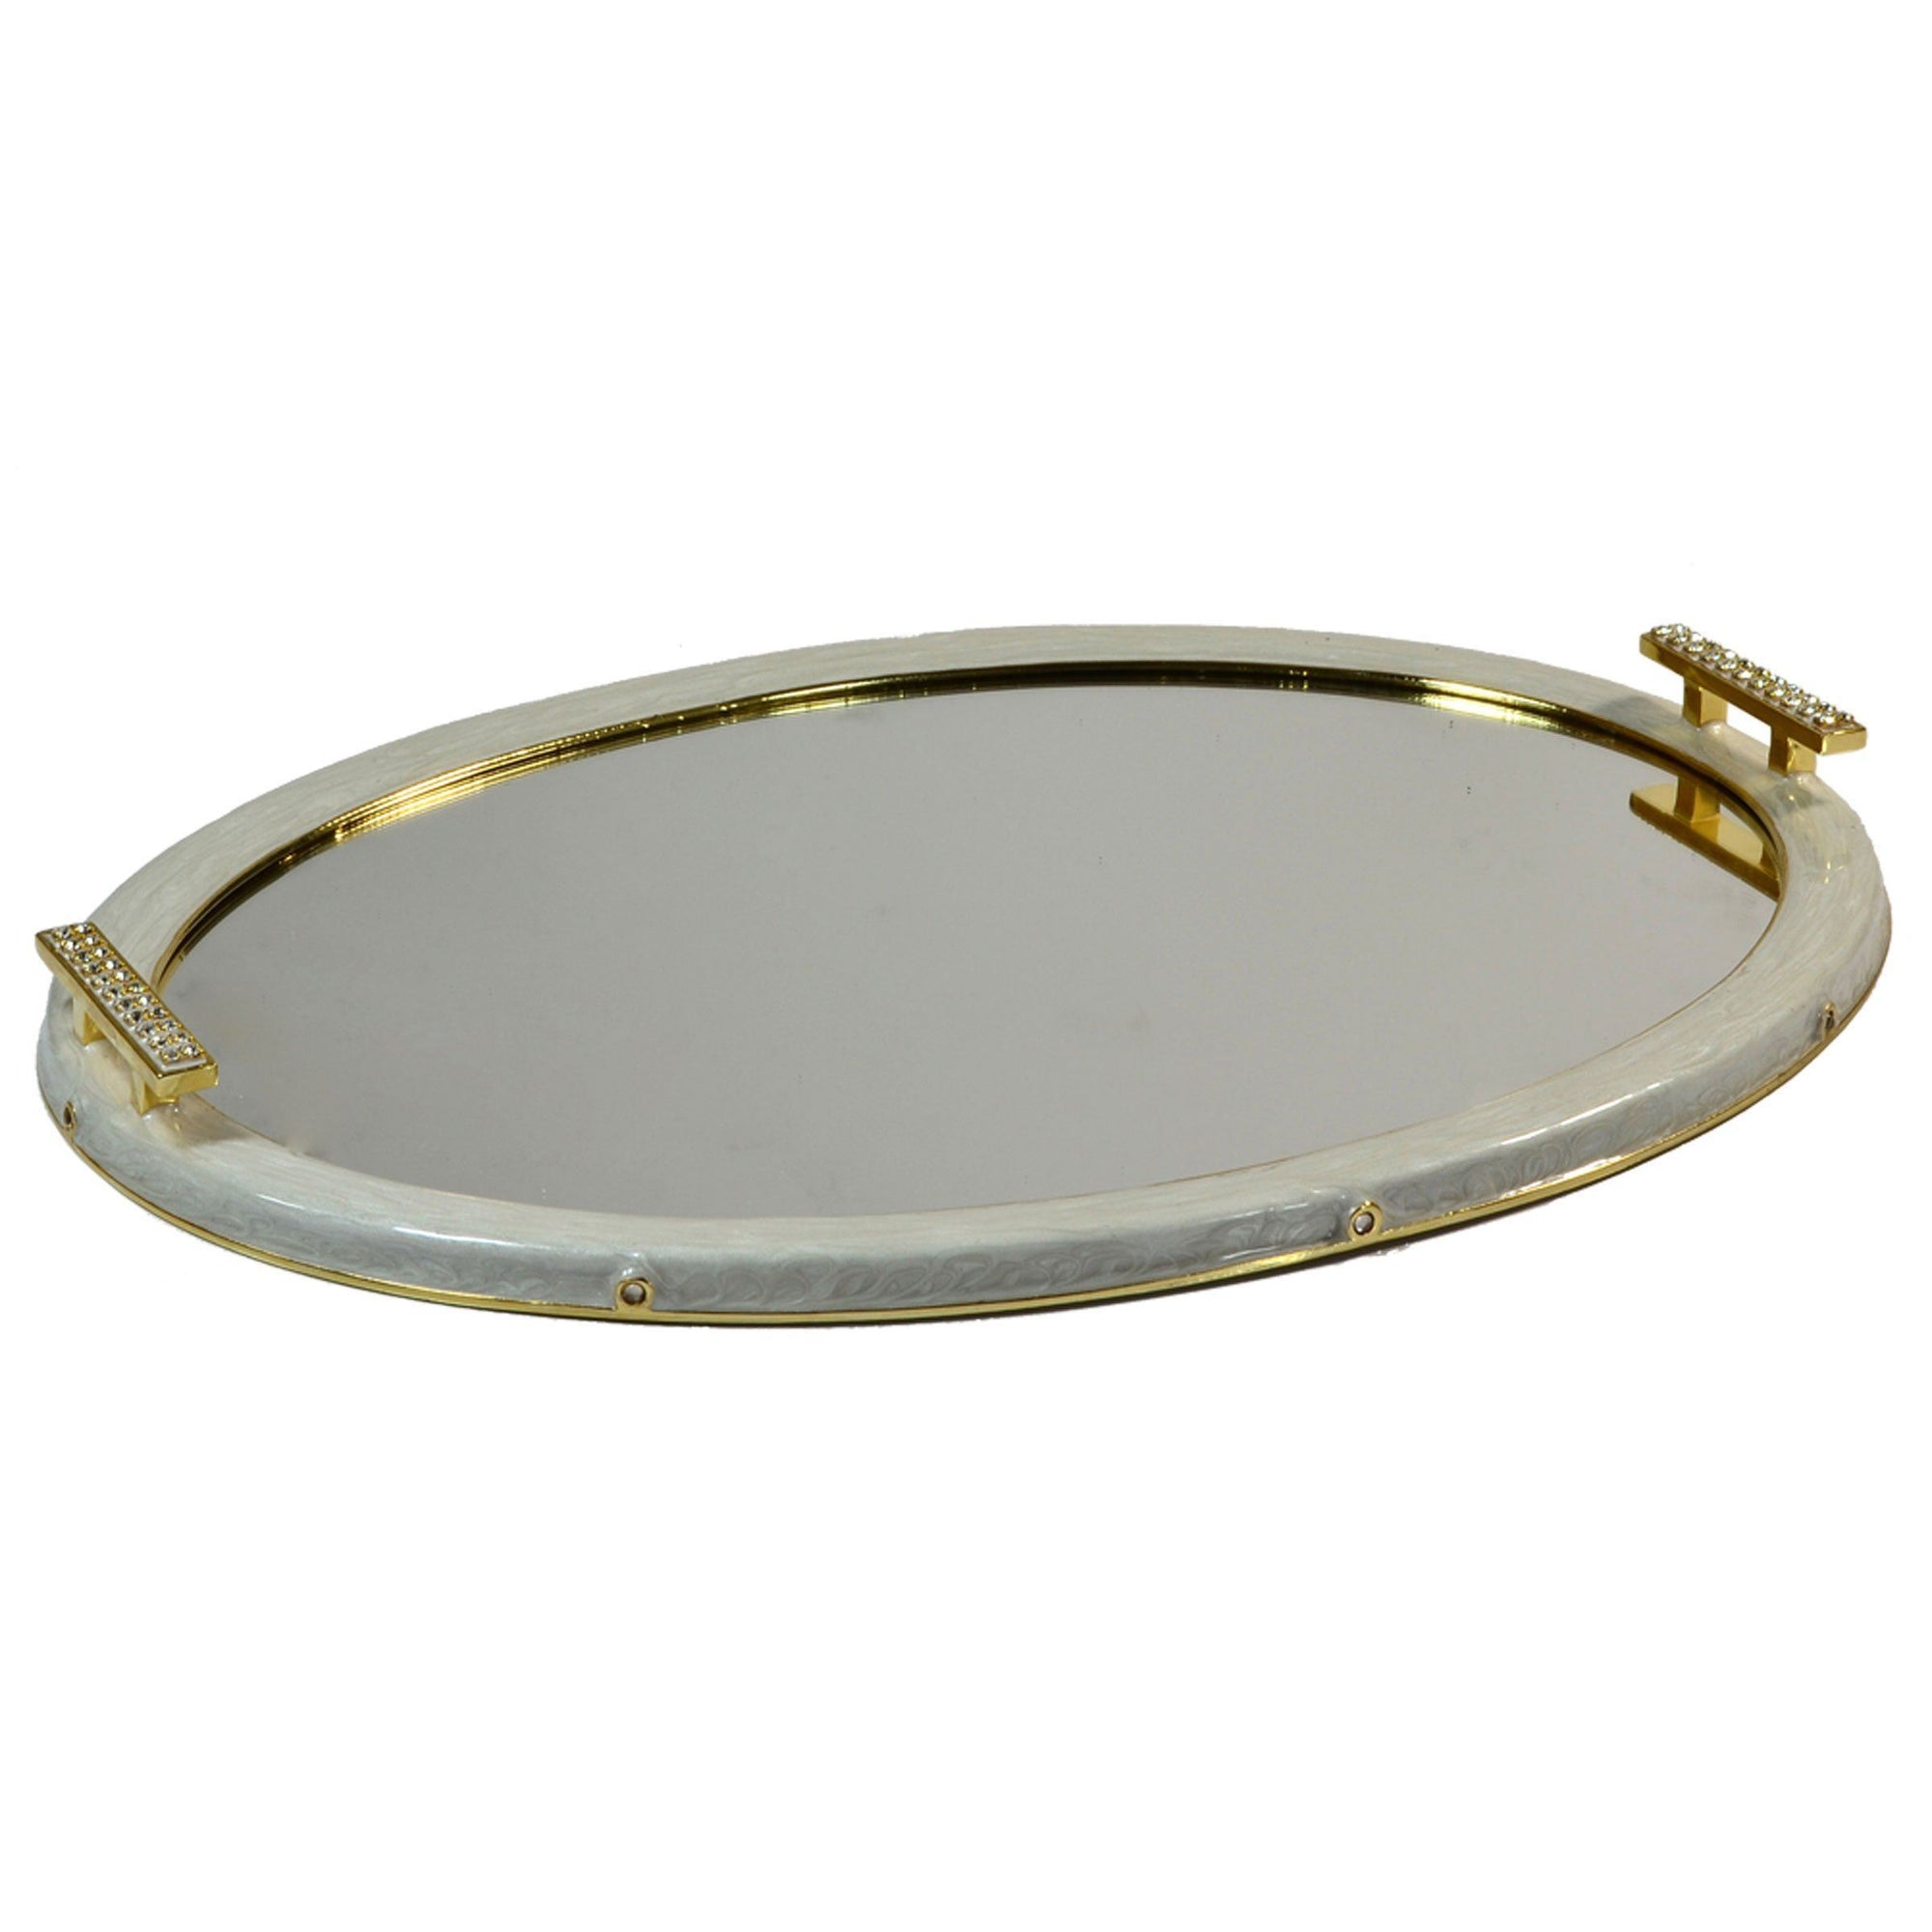 Fig Linens - Mike + Ally Audrey Bath Accessories - Oval Vanity Tray w/ Mirror